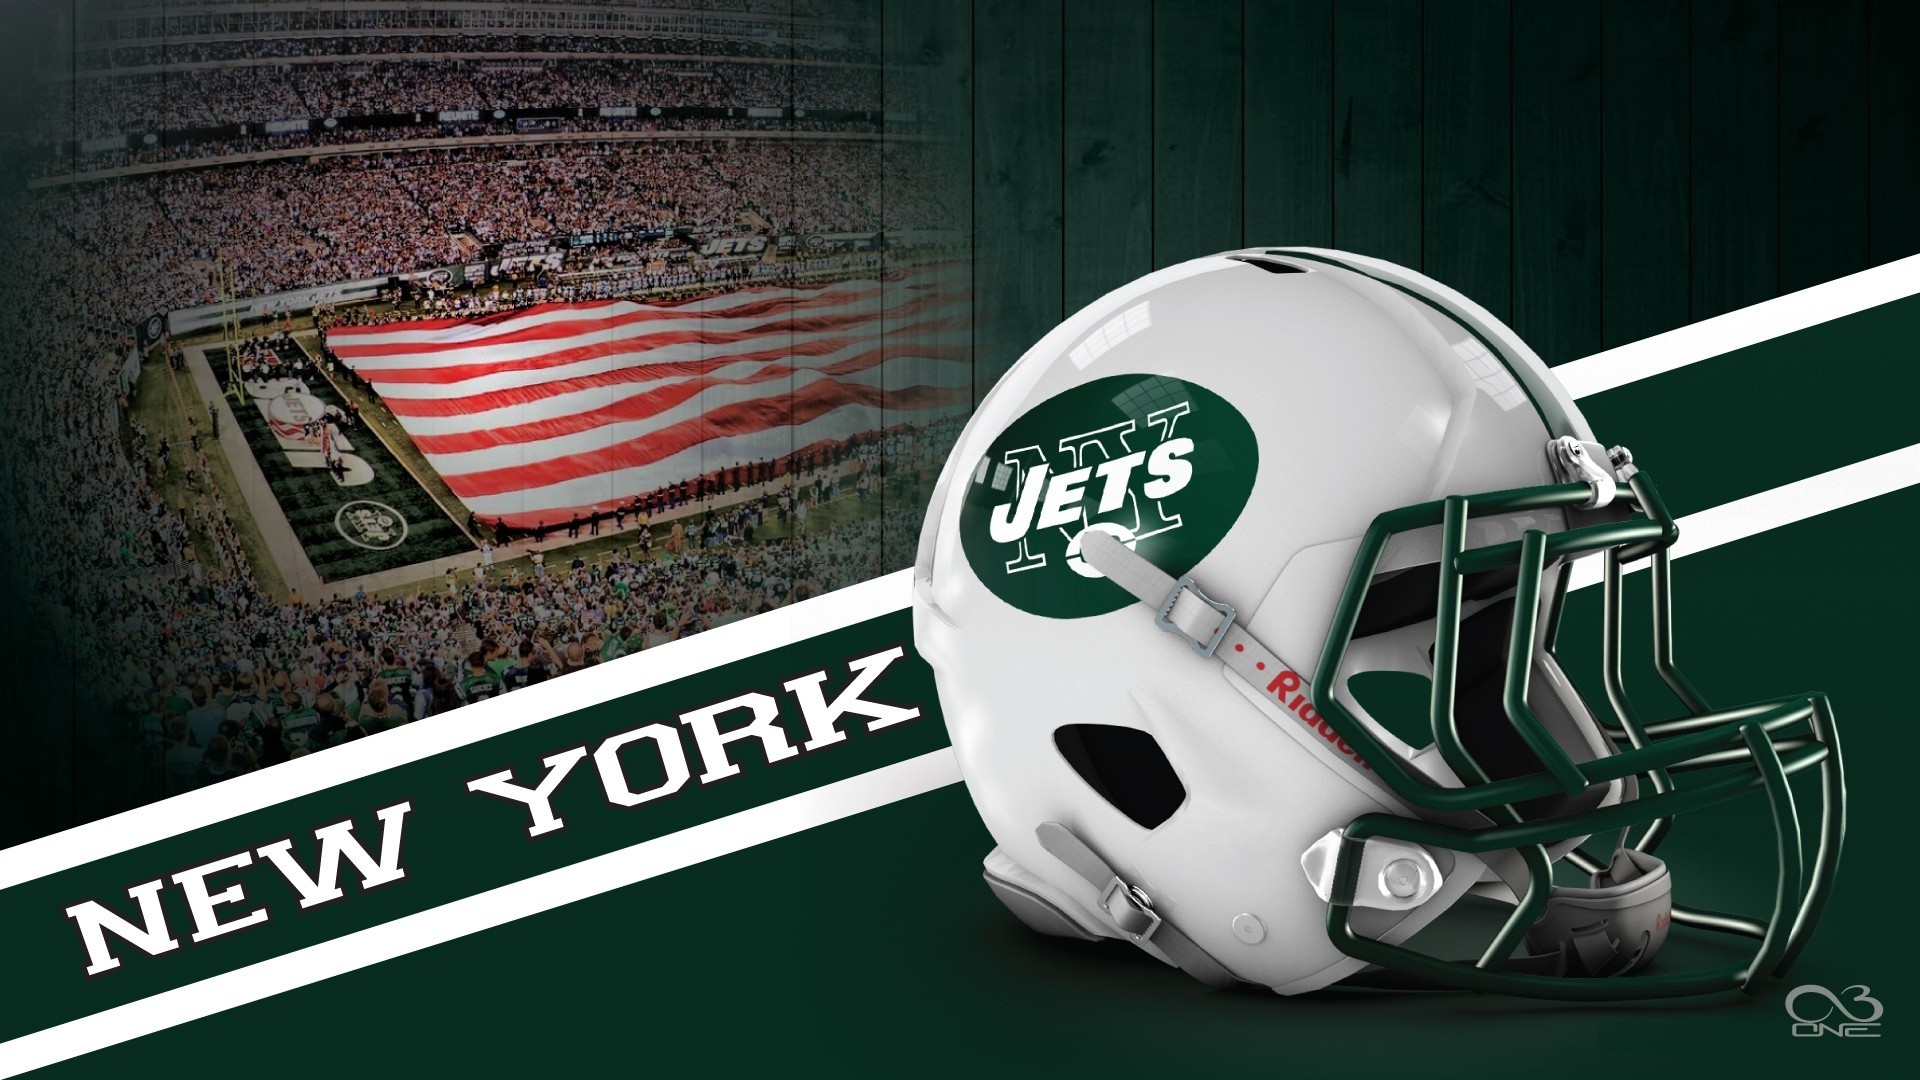 1920x1080 New York Jets For Desktop Wallpaper with resolution  pixel. You  can make this wallpaper